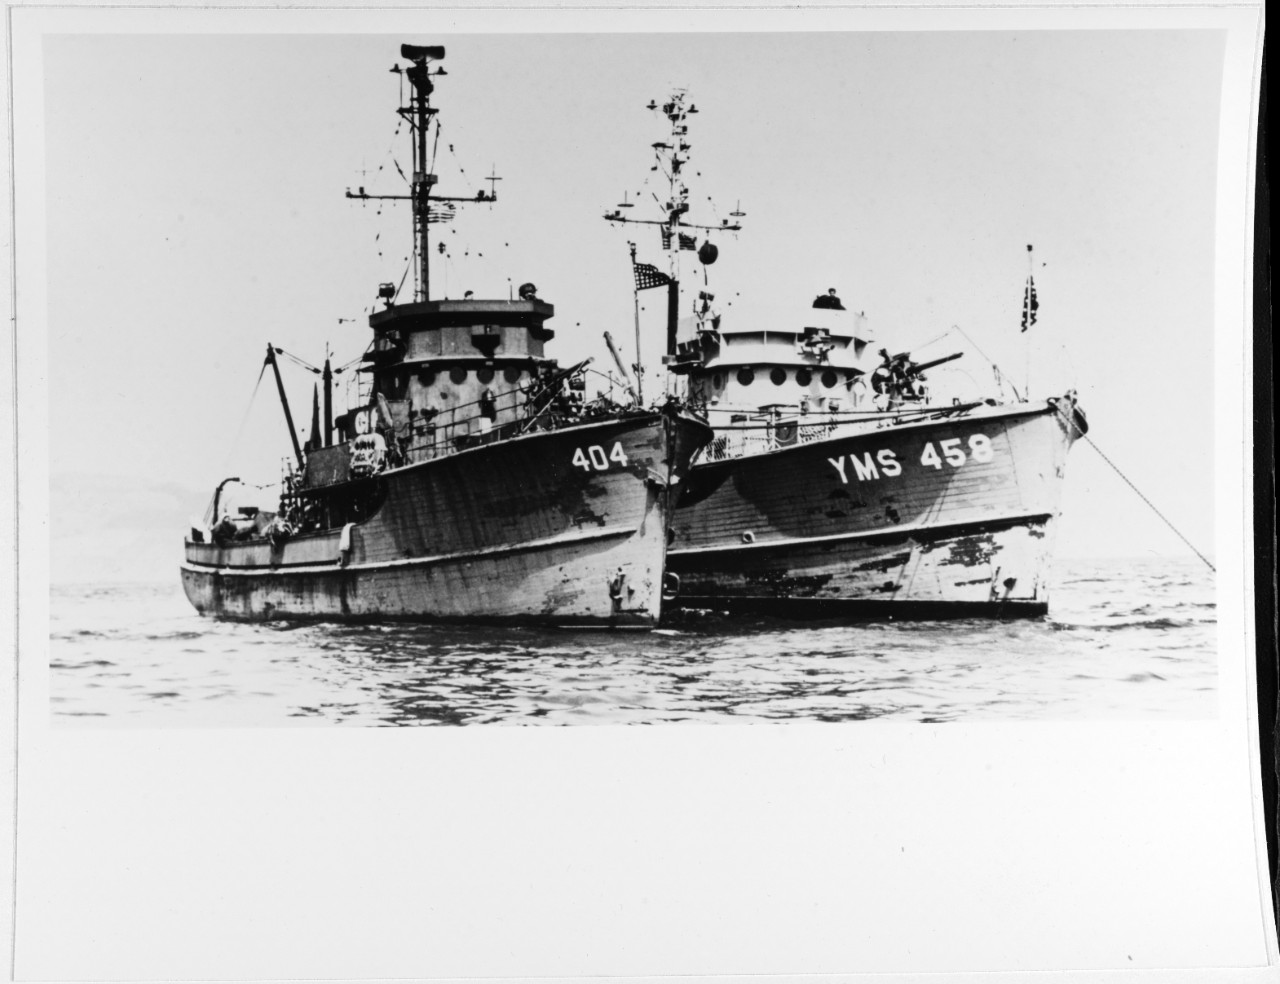 USS YMS-404 and USS YMS-458